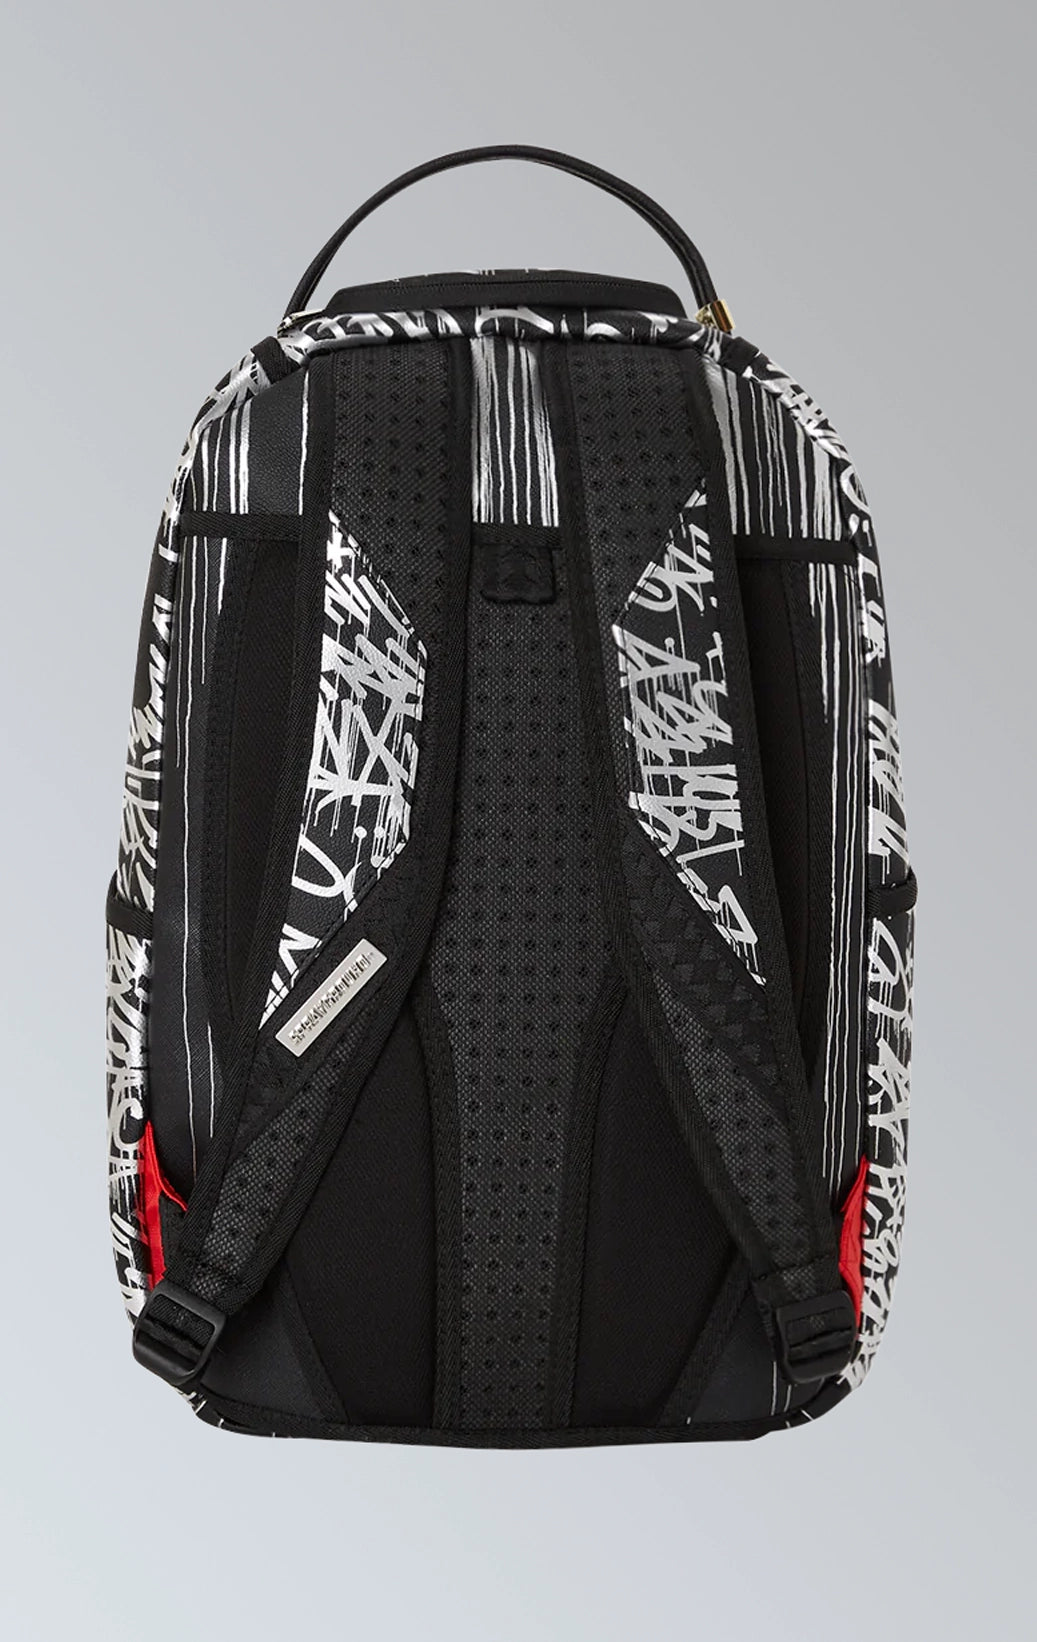 Stylish and functional Sprayground backpack featuring a metallic chrome finish and bold graffiti-inspired graphics. It has a spacious main compartment, front zippered pocket, side pockets, hidden zippered pocket, separate velour-lined sunglass compartment, ergonomic mesh back padding, adjustable straps, metal zippers and hardware, reflective Sprayground logo, and unique Street Life design.